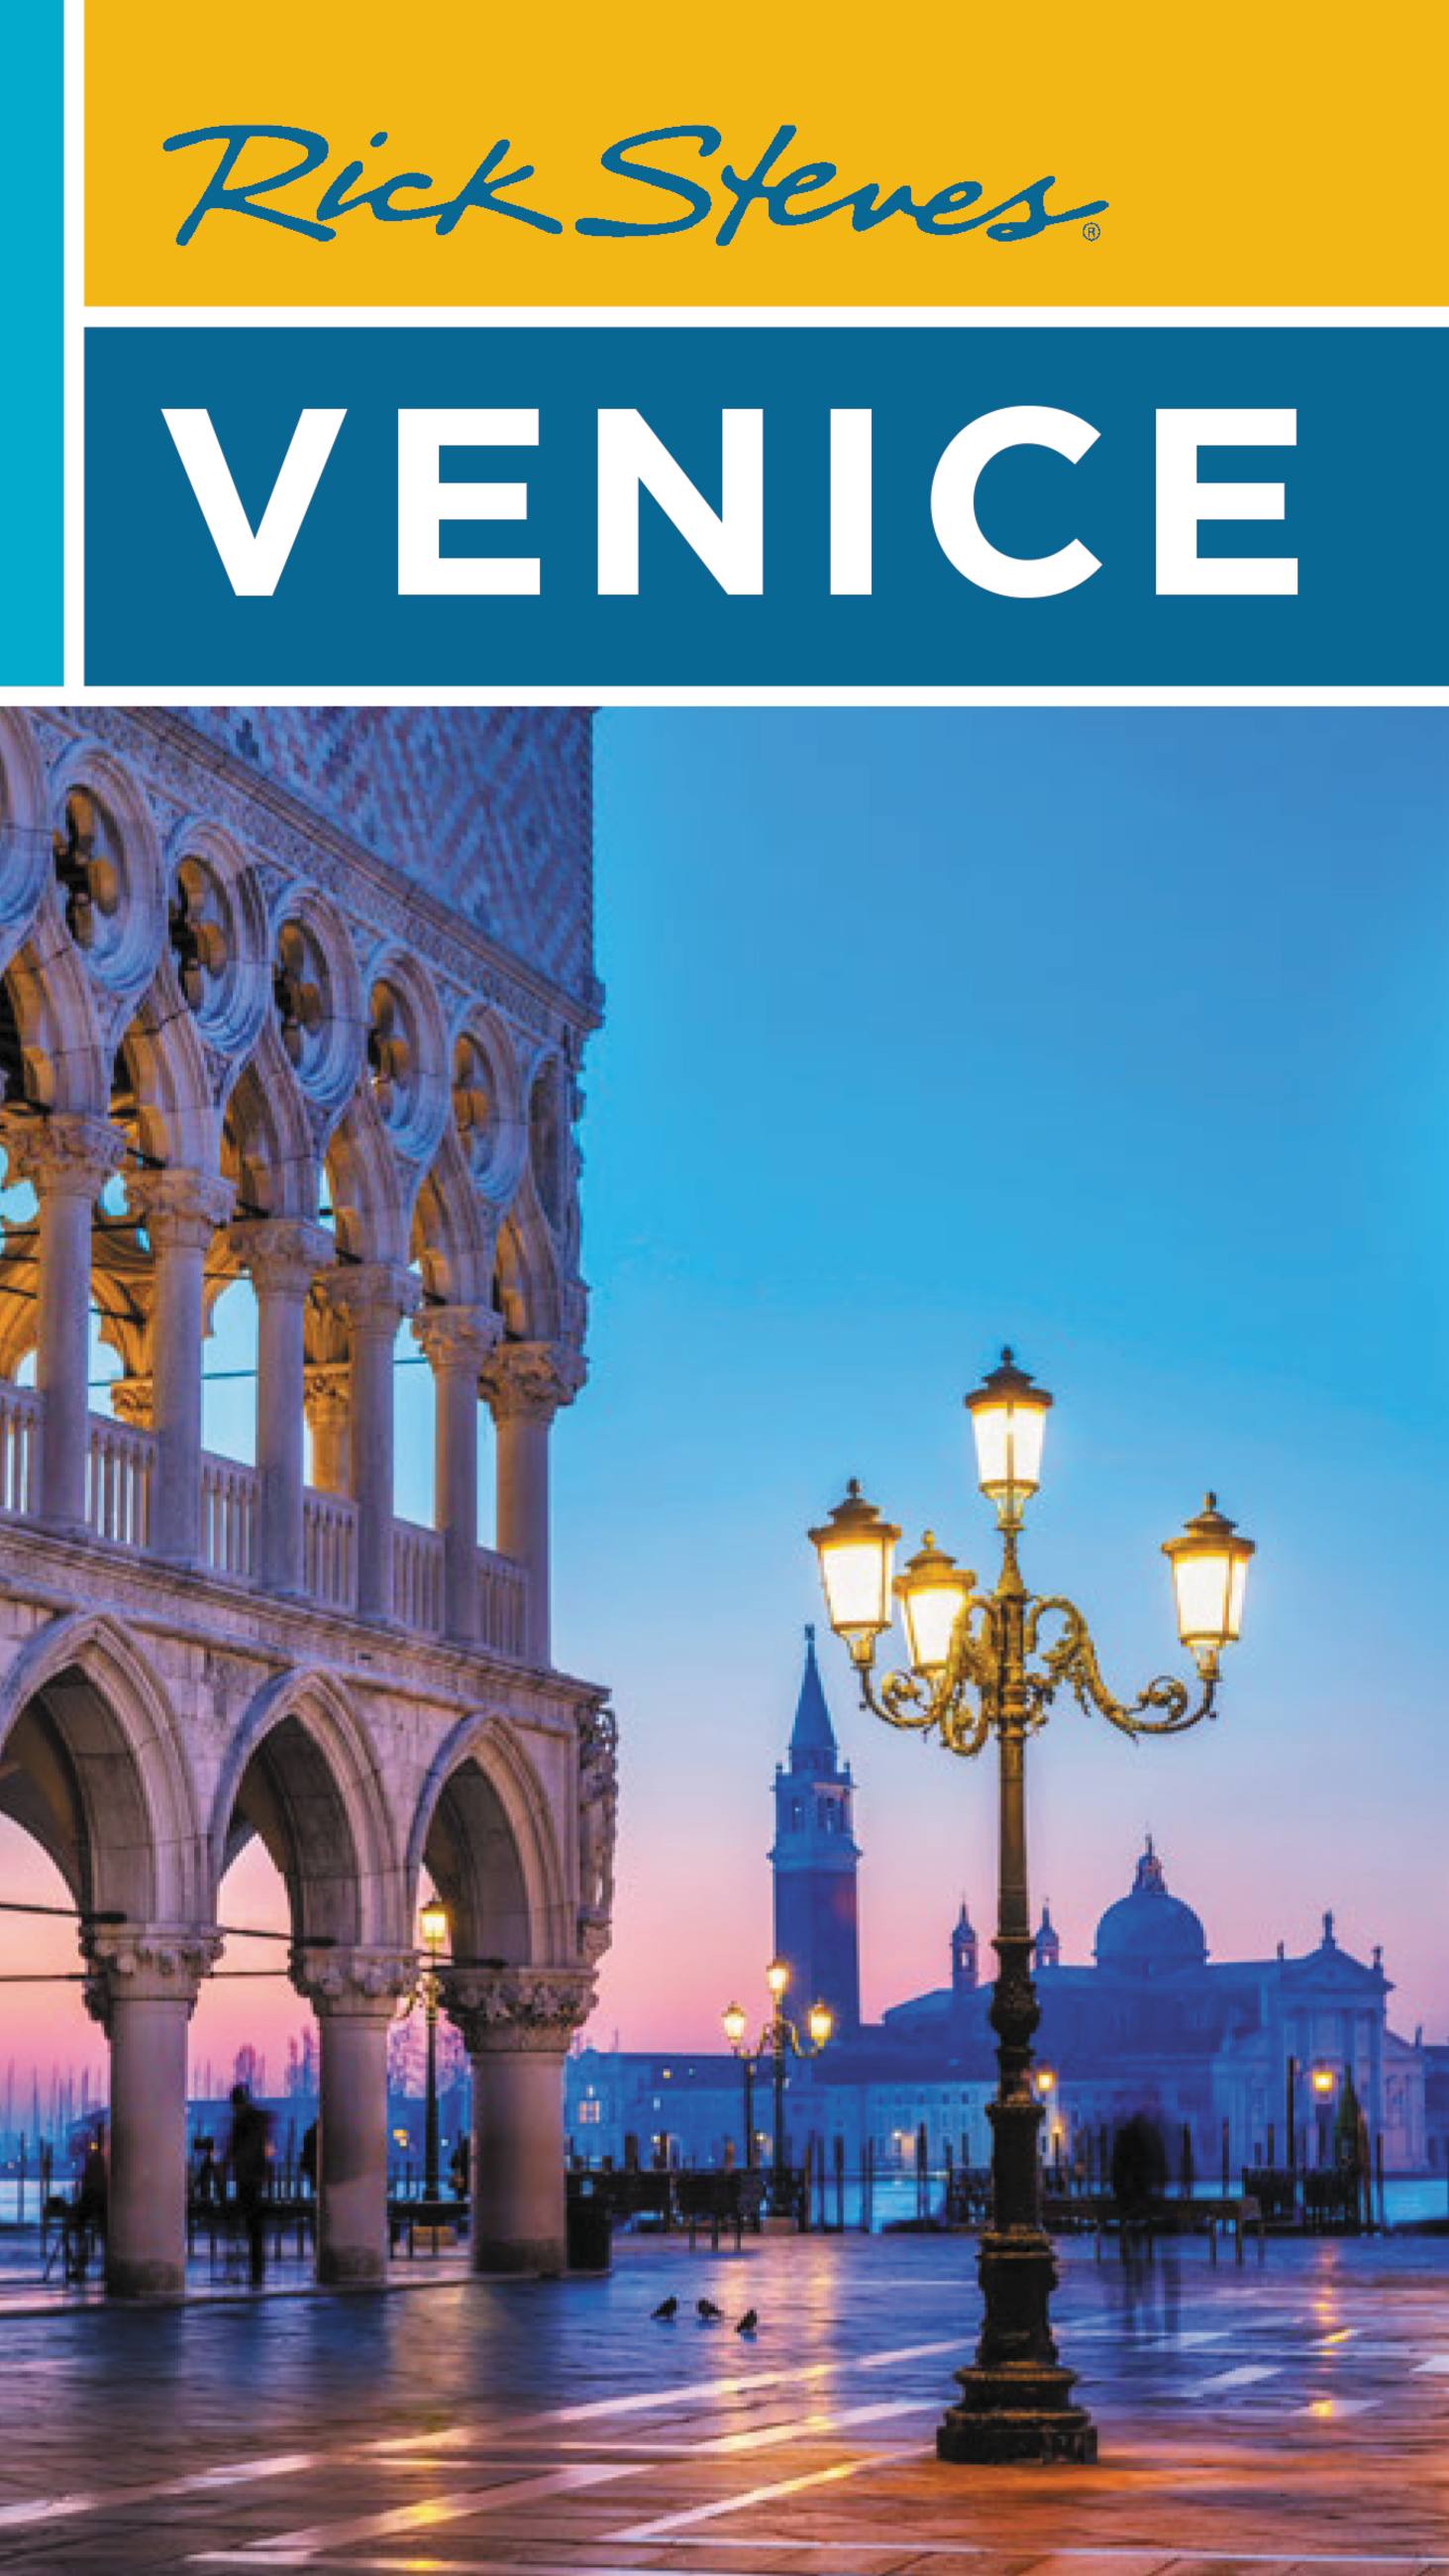 Cruise Guide to the Europe & The Mediterranean (Eyewitness Travel Guides)